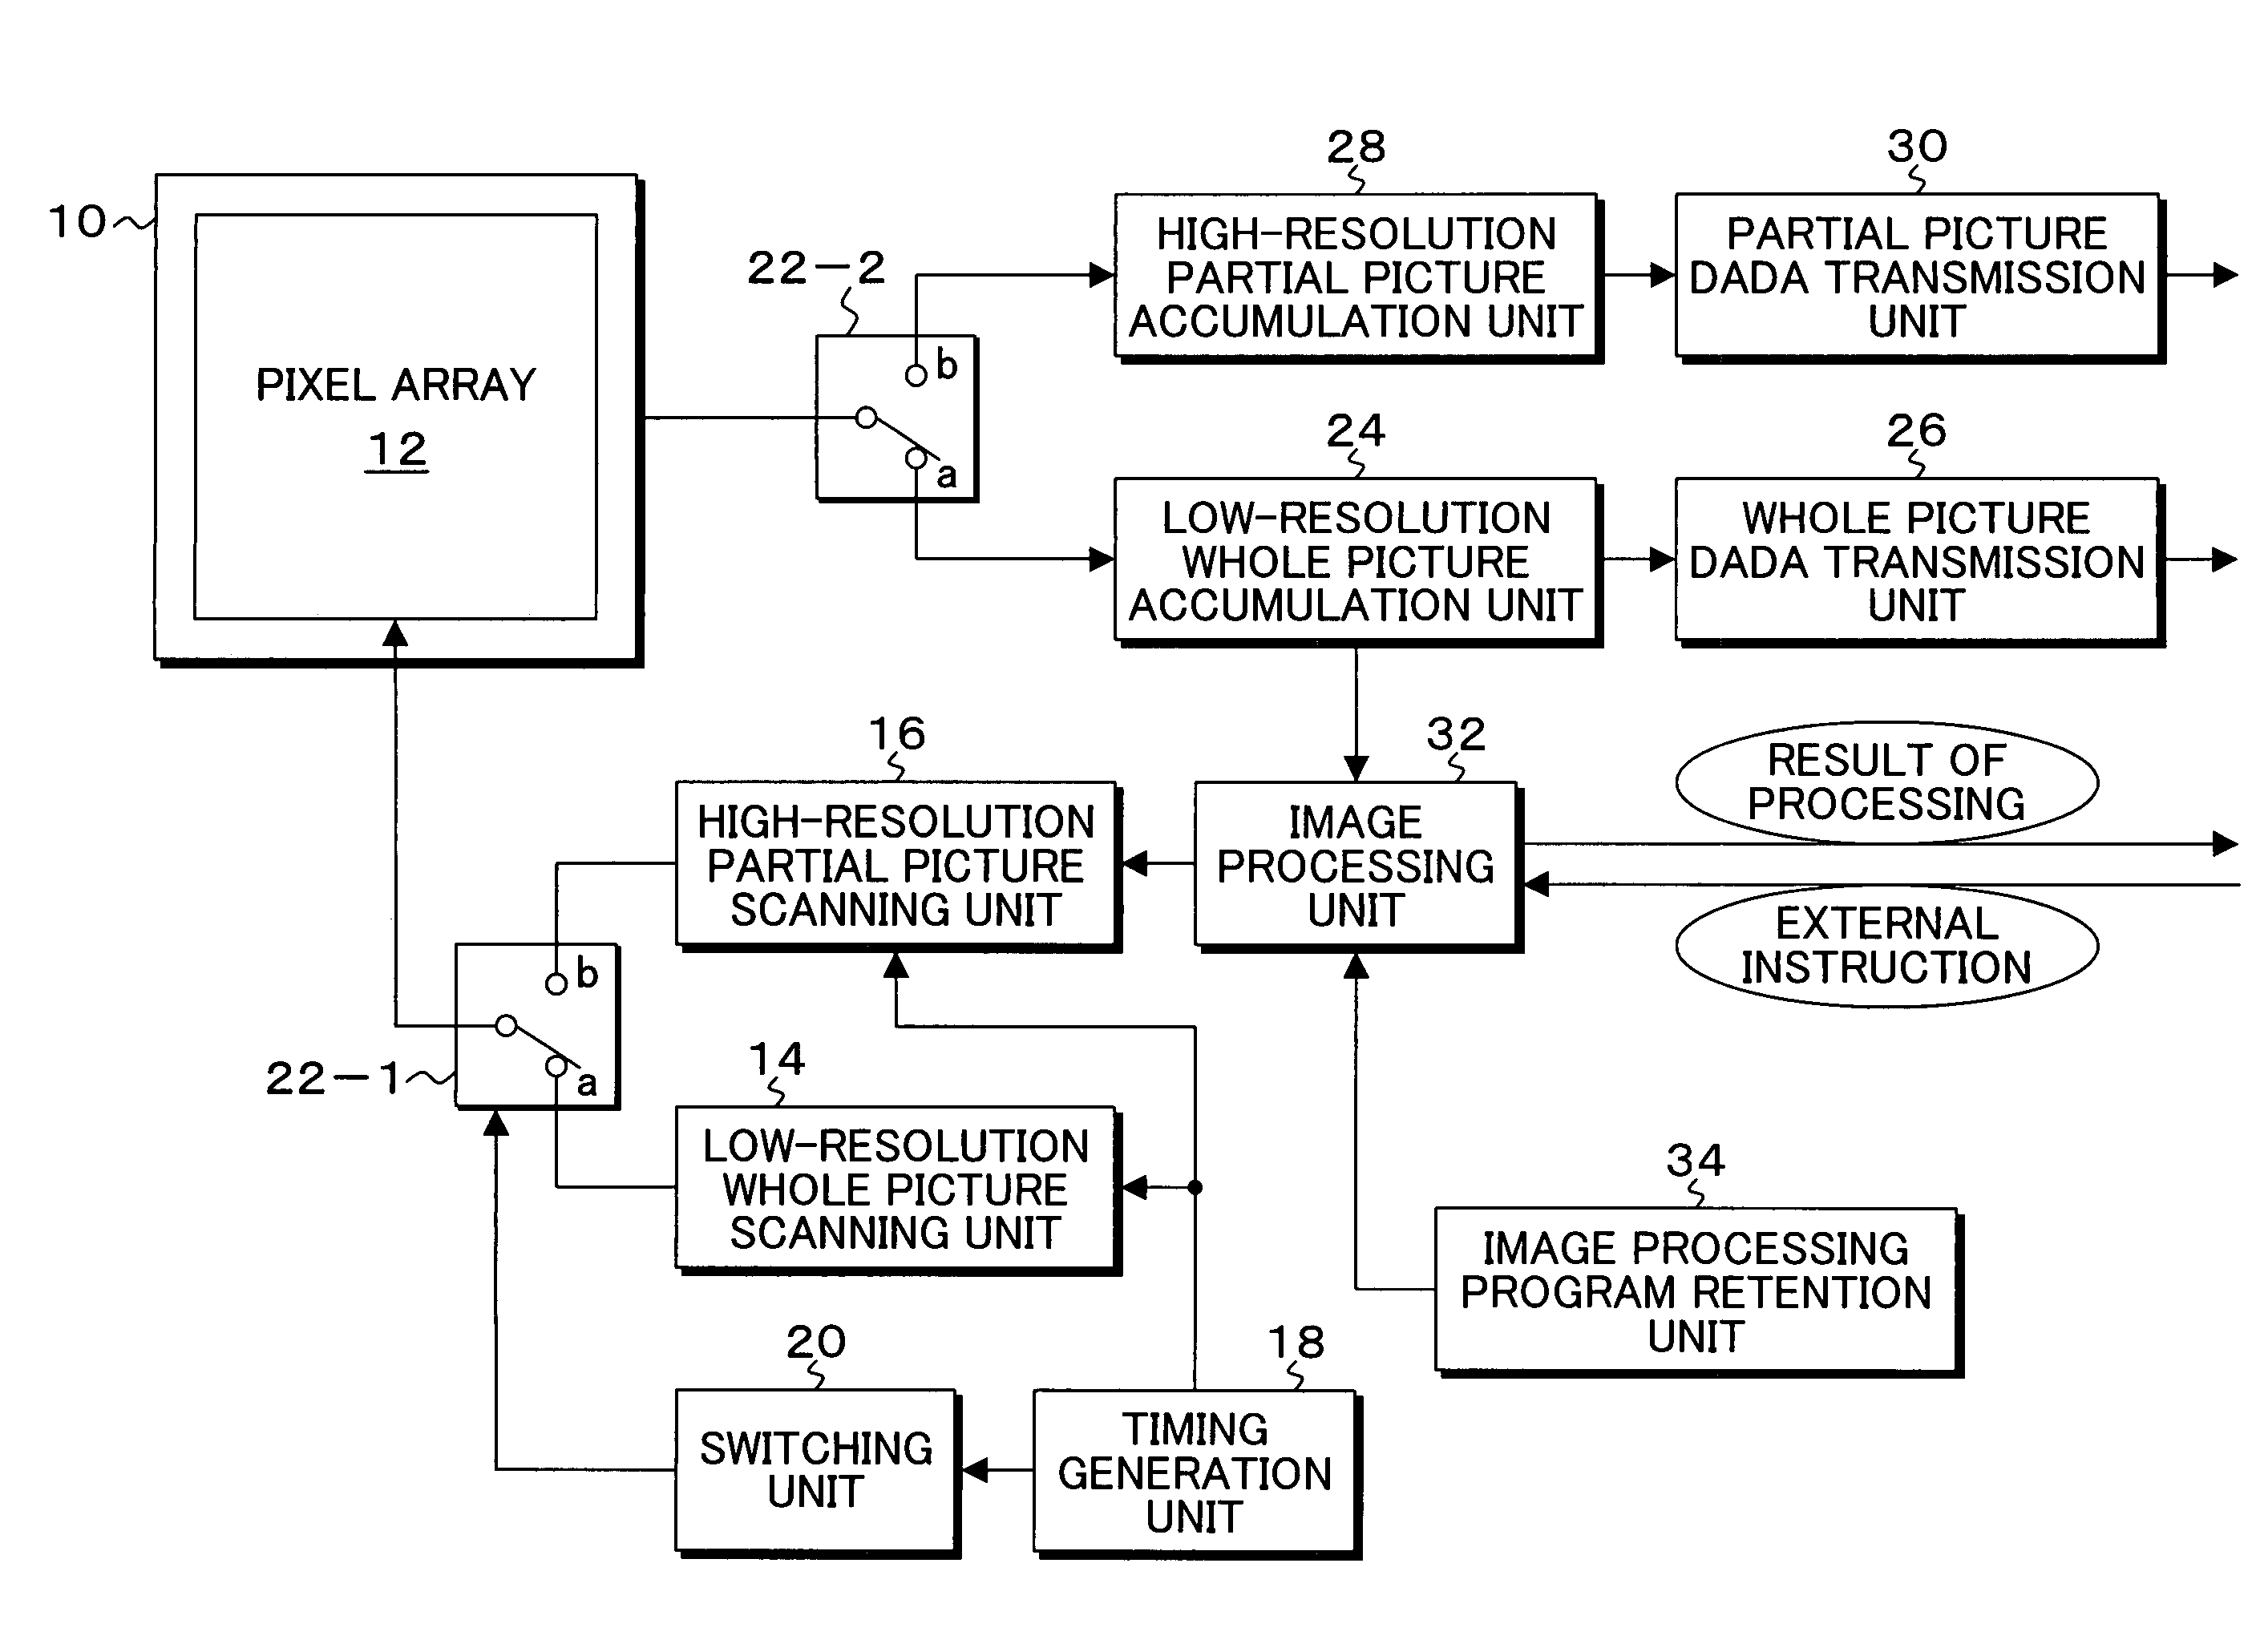 Picture inputting apparatus using high-resolution image pickup device to acquire low-resolution whole pictures and high-resolution partial pictures